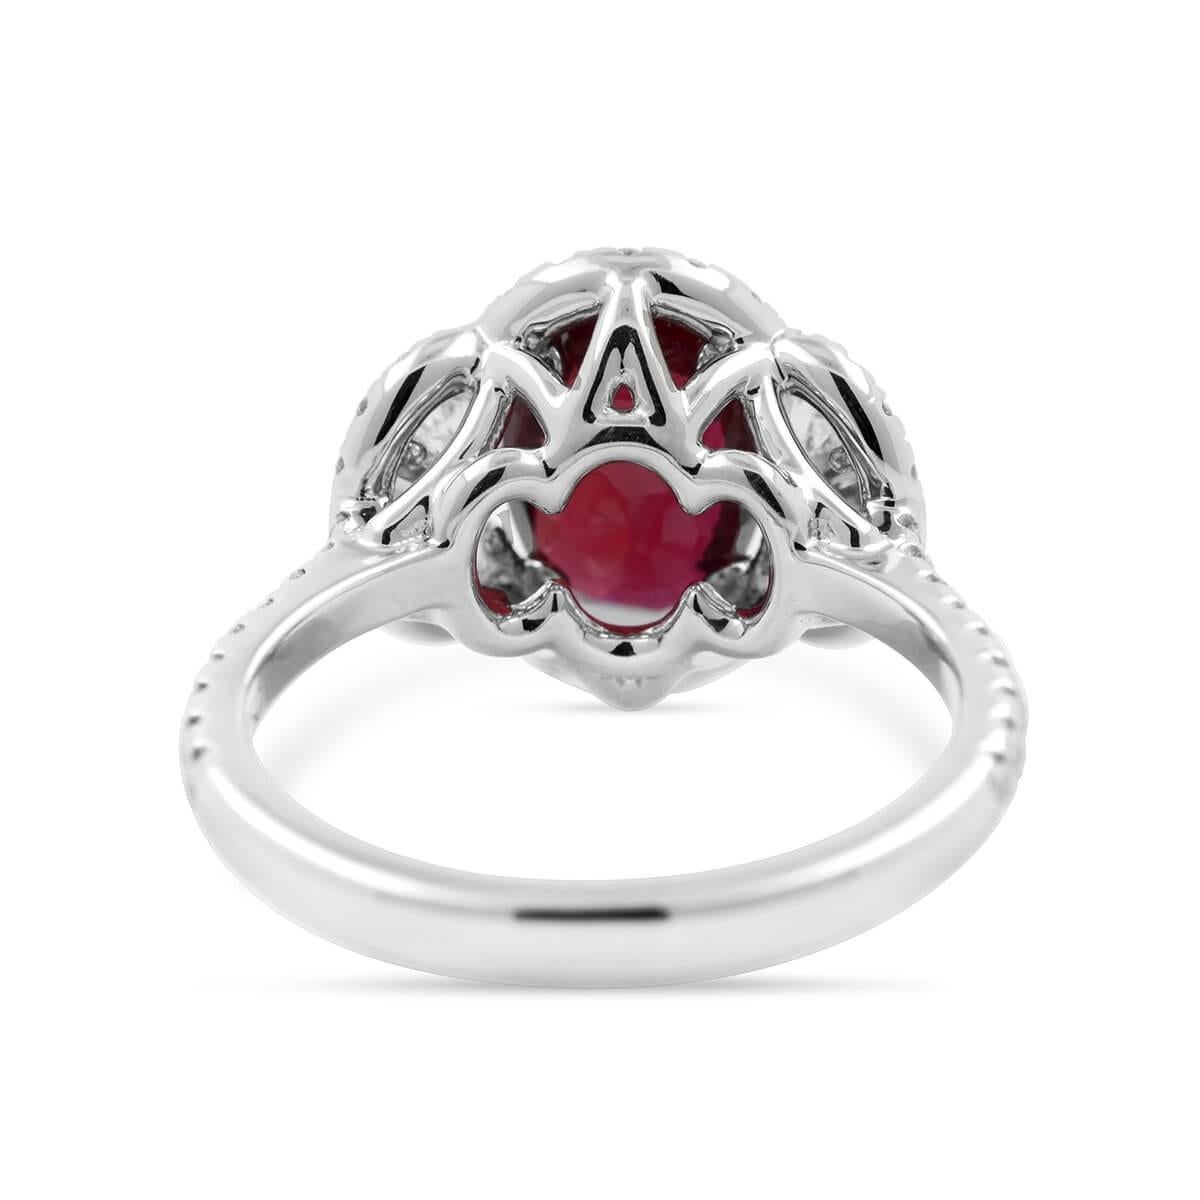 RUBY AND DIAMOND RING - 2.73 CT


Set in 18KT White gold


Total ruby weight: 1.81 ct
[ 1 stone ]
Color: Red
Origin: Mozambique

Total oval cut diamond weight: 0.47 ct
[ 2 diamonds ]
Color: G-F
Clarity: VS

Total brilliant cut diamond weight: 0.45